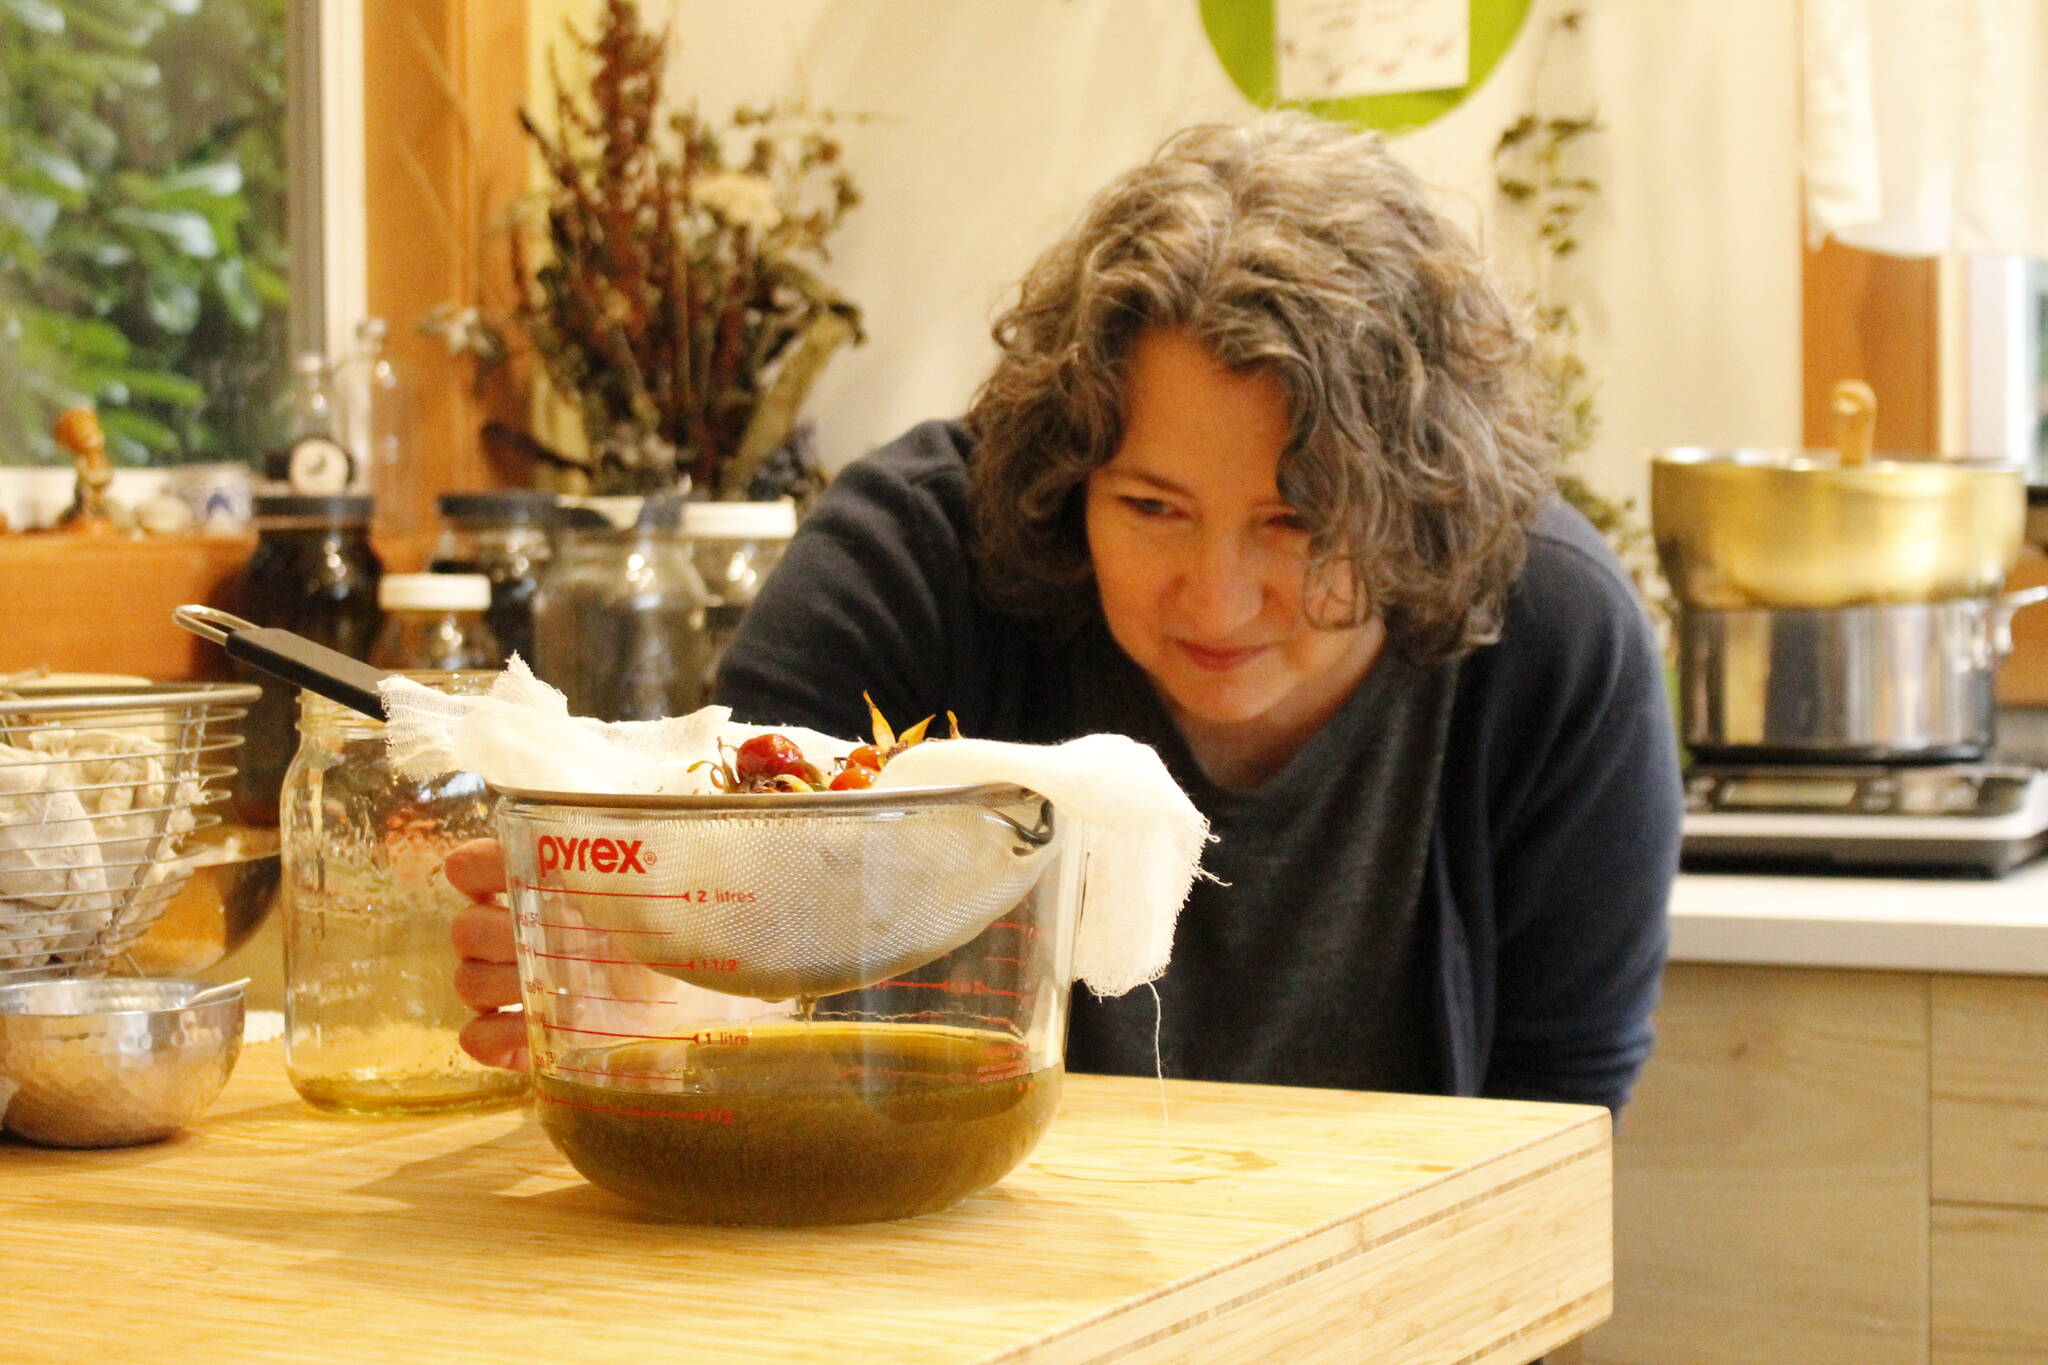 Photos by Kira Erickson/South Whidbey Record
Herbalist Lori Kane checks the level of rosehip-infused oil. Her herbalism business is the newest branch of Silly Dog Studios.